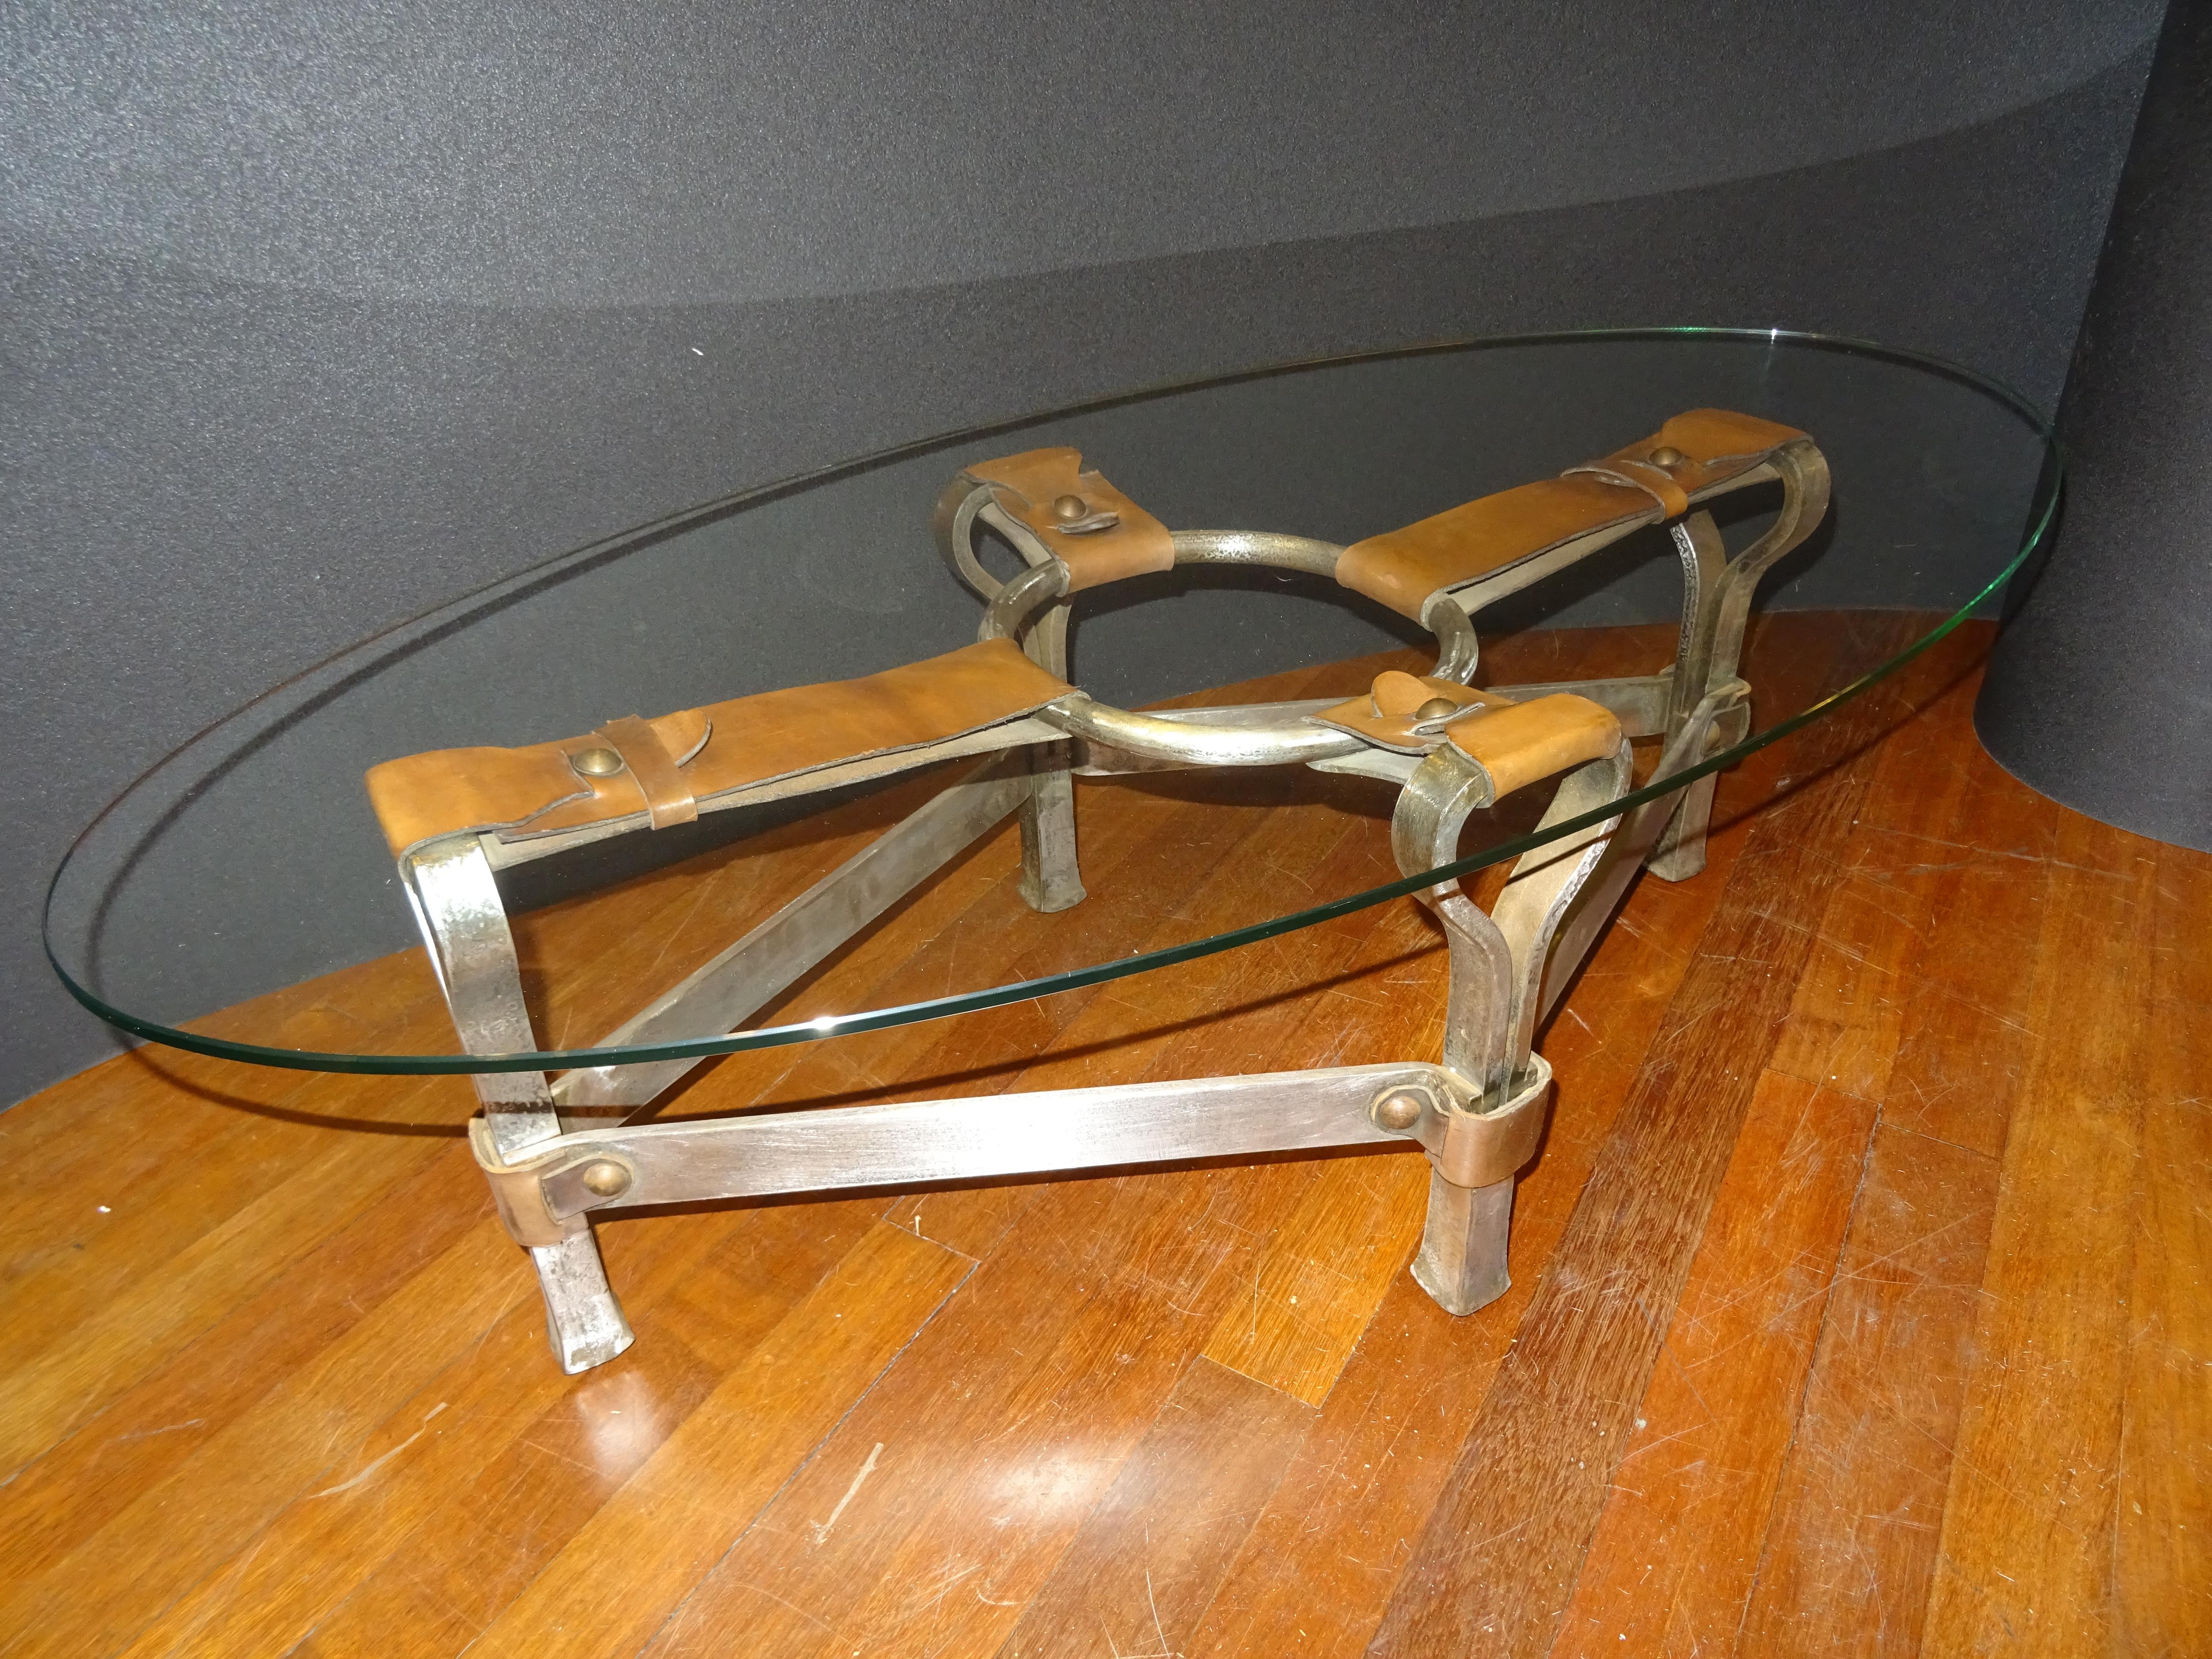 One of a kind piece, unique, leather, steel and crystal coffee table designed by Jacques Adnet (1900-1984), who was a French Art Deco modernist designer, architect and interior designer. He was known for his furniture designs in leather. He works